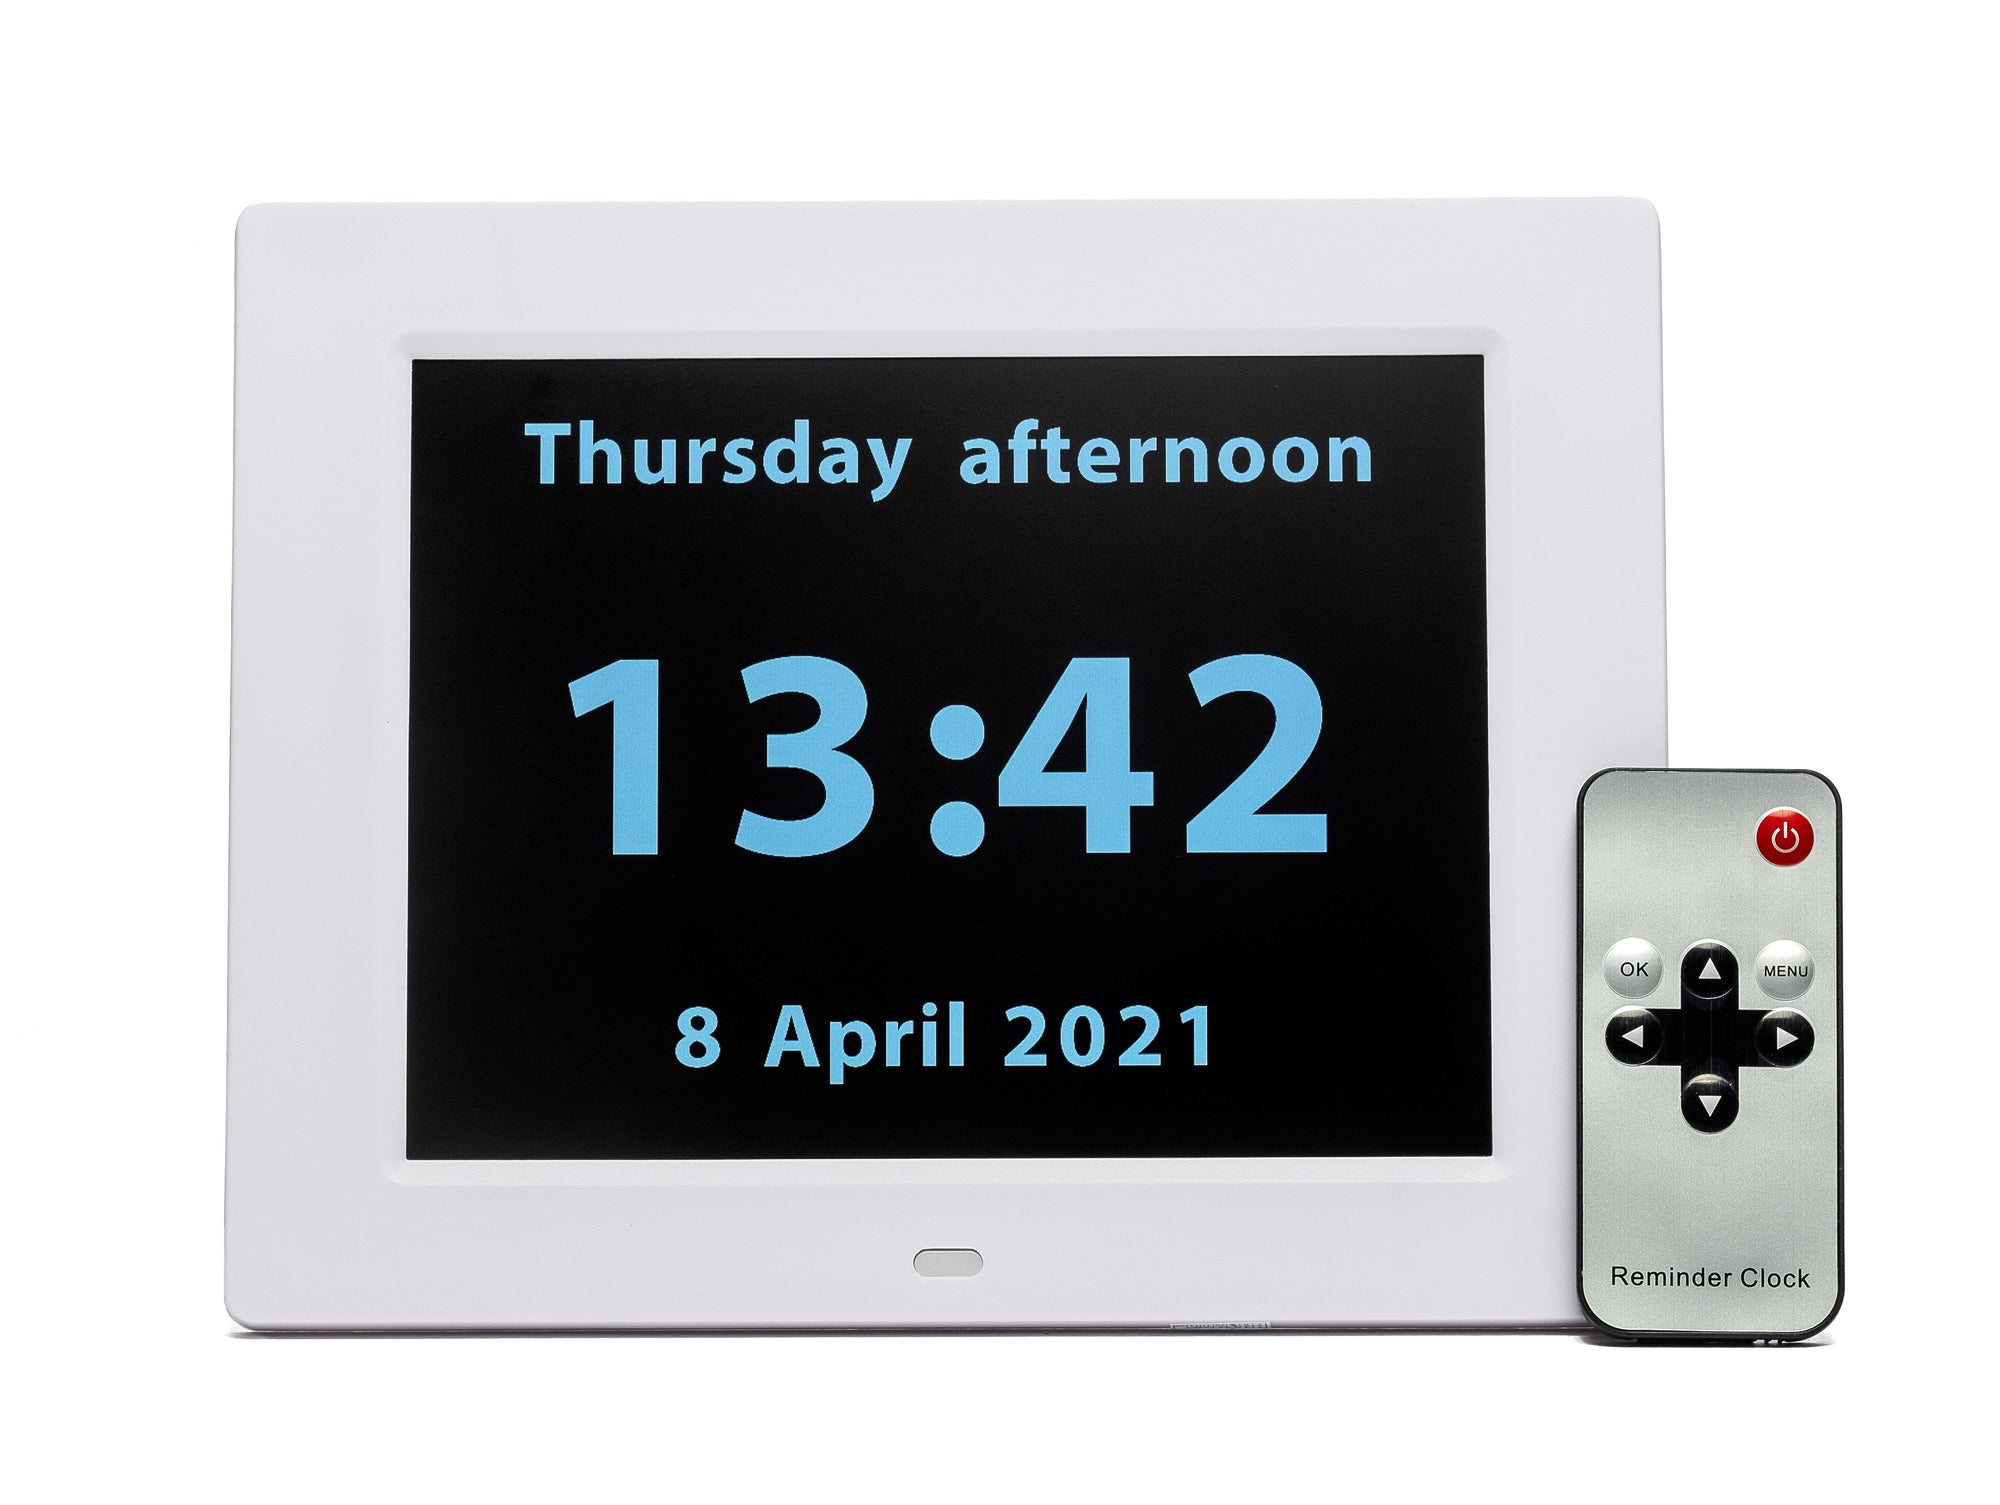 The clock has a thick white border and black screen which displays the day, time, date and year in clear pale blue alphanumeric digital display.  Across the top of the screen the text reads'Thursday afternoon'. Across the bottom of the screen, in the same font, the text reads '8 April 2021'.  In the middle of the screen the time is given in large 24-hour clock numbers. 